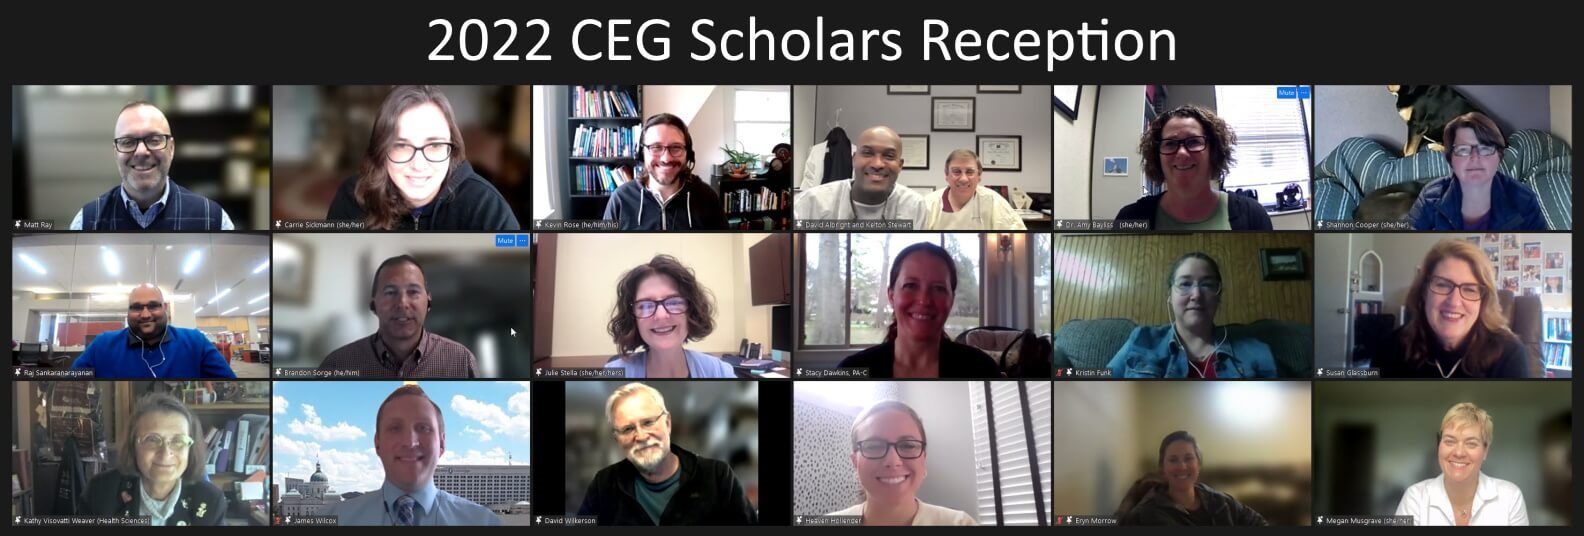 The 2022 CEG Scholars smiling together on Zoom.